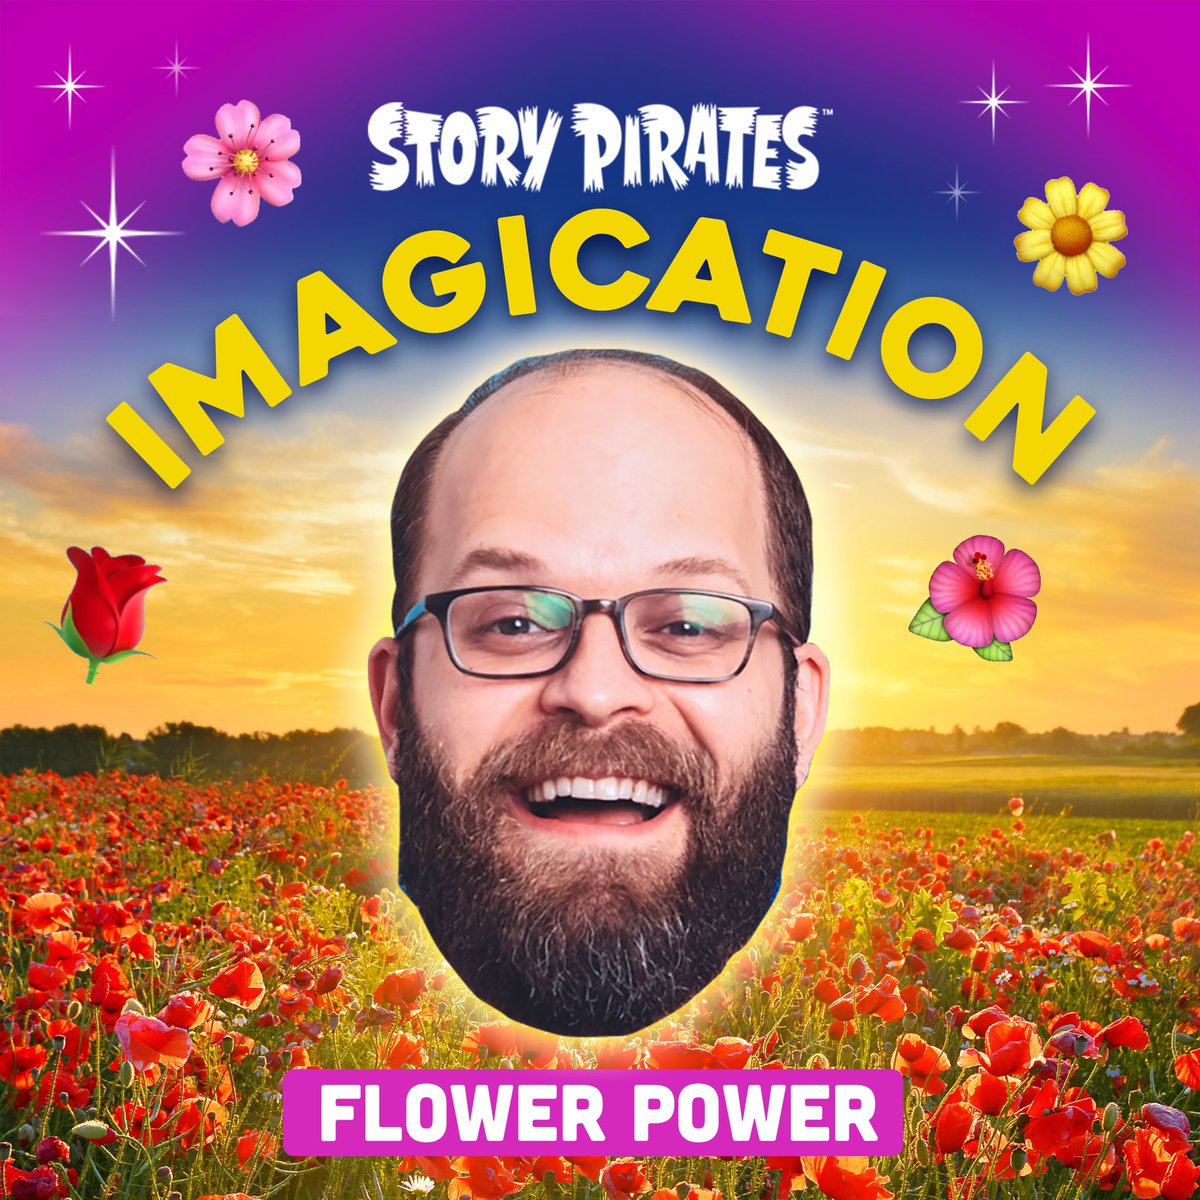 New Imagication! 🌸🧘 Peter guides listeners through a creative visualization with hypoallergenic pollen & a Mariah Carey impression and Australian accent that are... not great.  Listen in Creator Club at storypirates.com/creatorclub or on Story Pirates Podcast Plus feeds!